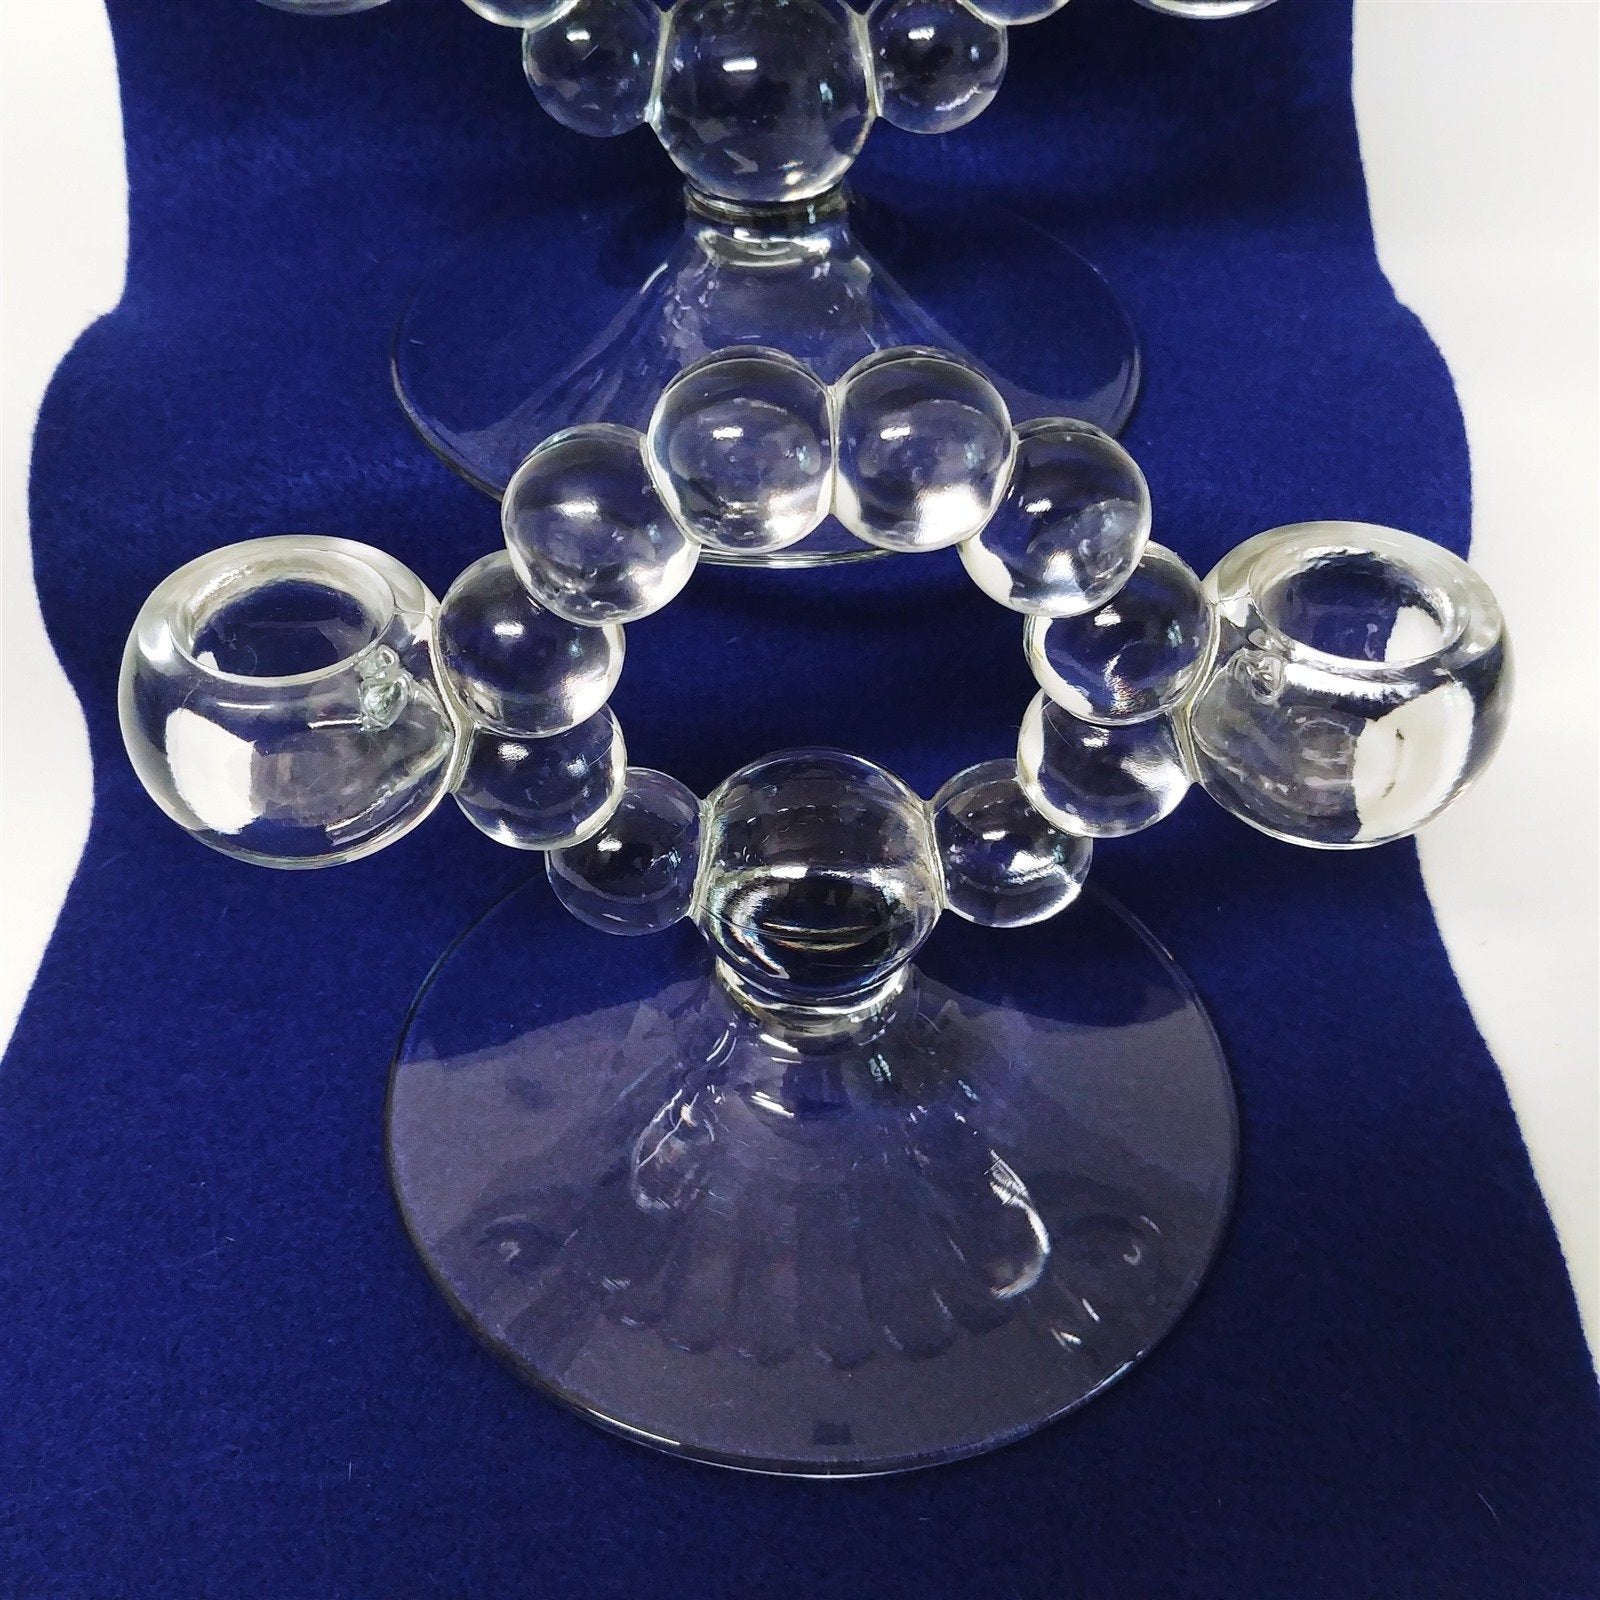 Imperial Glass Candlewick Double Taper Candle Holder 2pc set